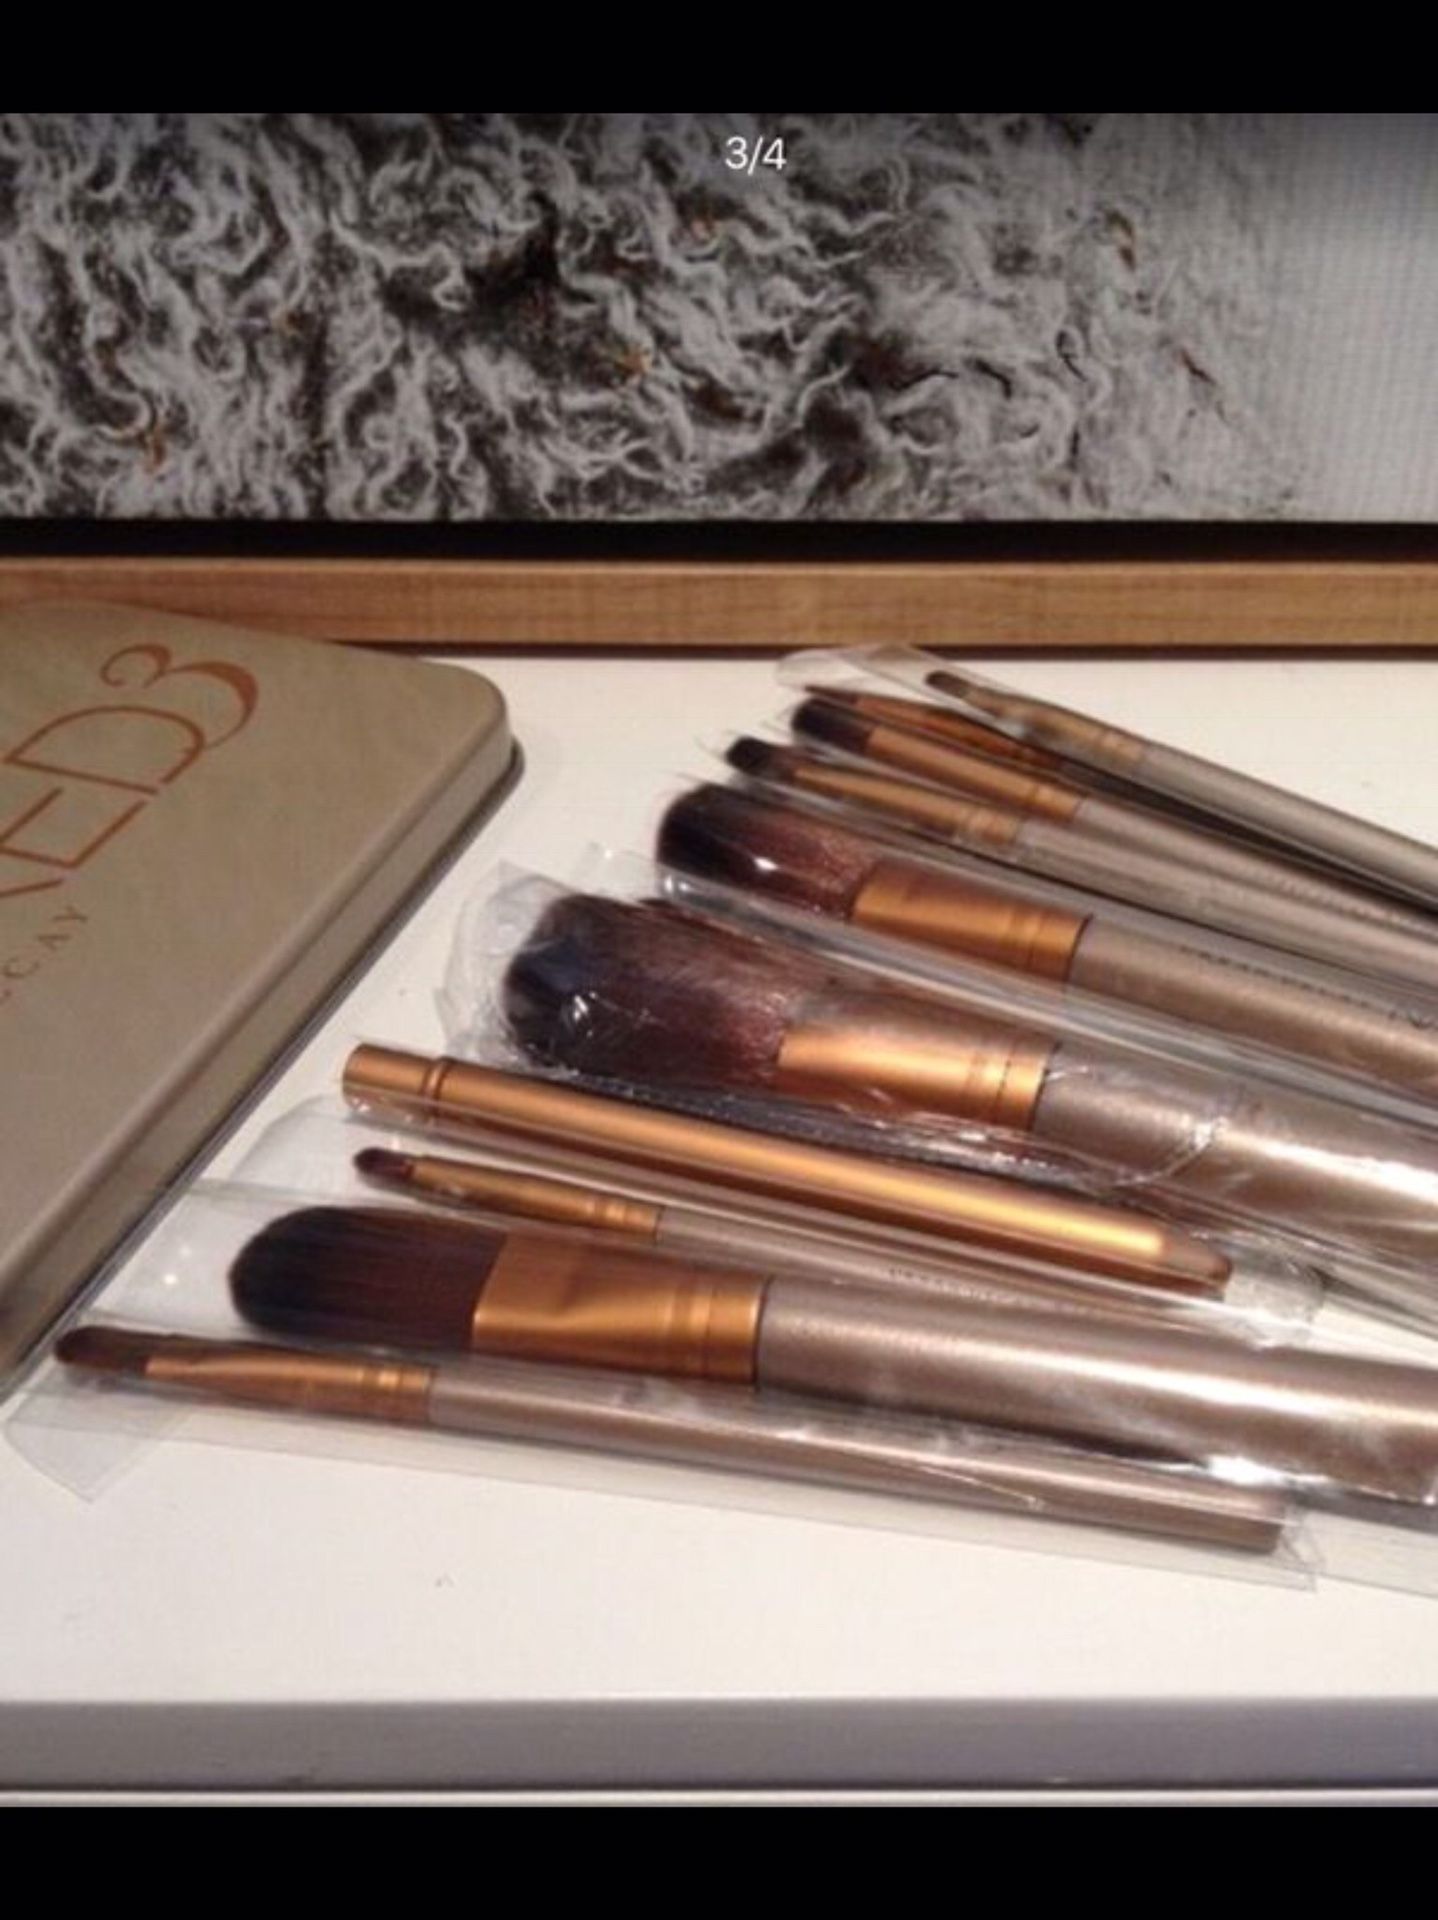 12 Makeup Brushes with case